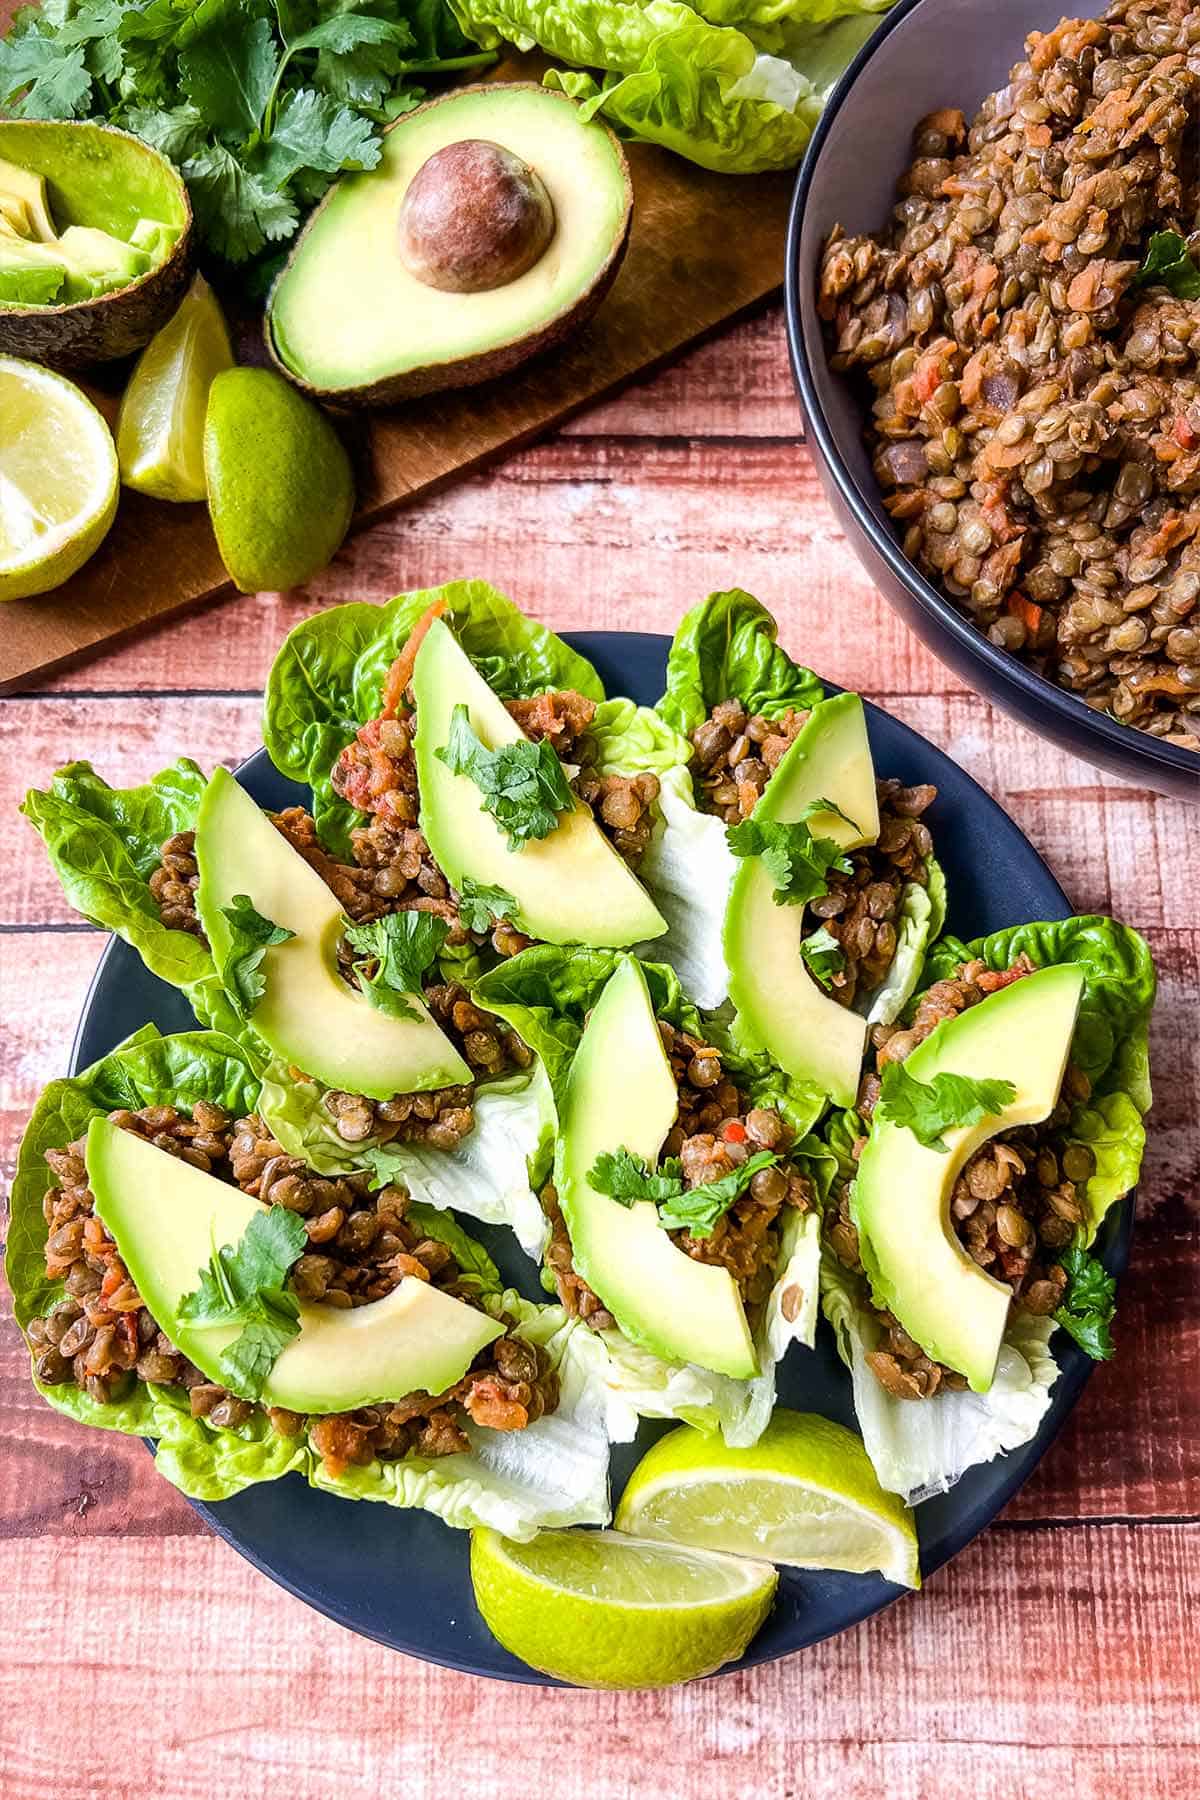  A plate of vegetarian lettuce wraps on the table with avocado and bowl of lentil meat in the top.